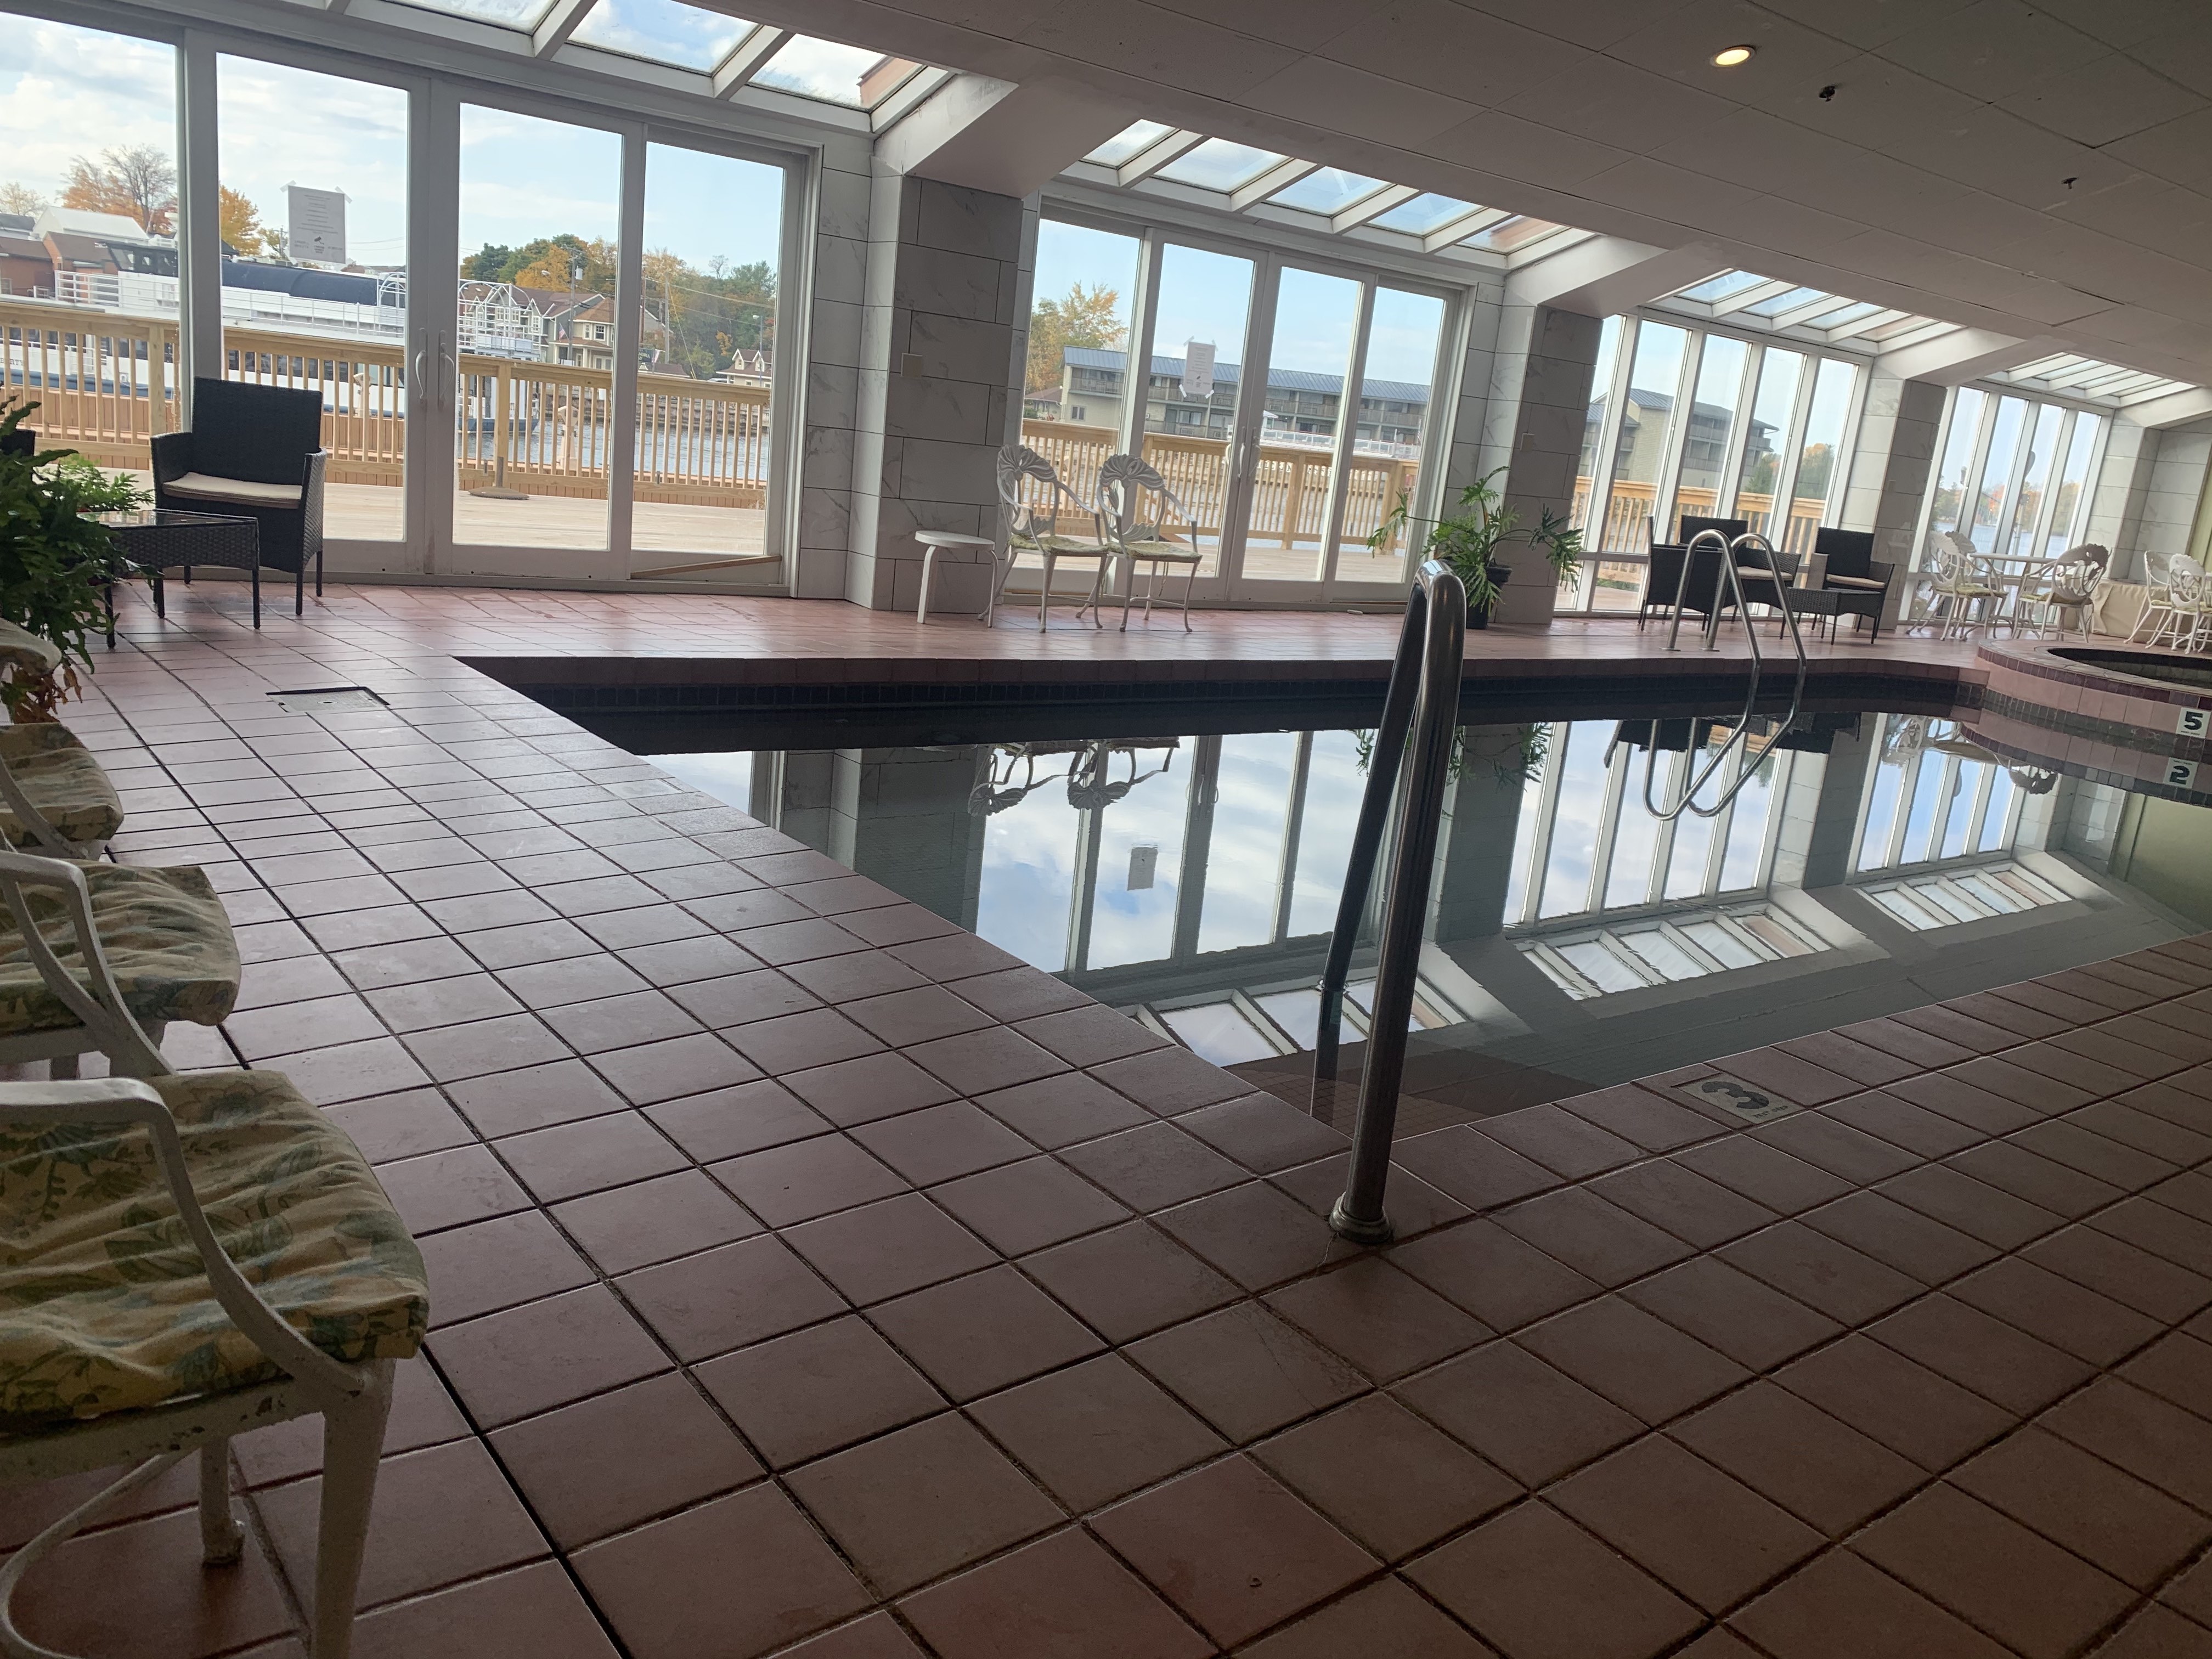 Indoor Pool and Fitness Room. Come see everything Riveredge Resort has to offer!